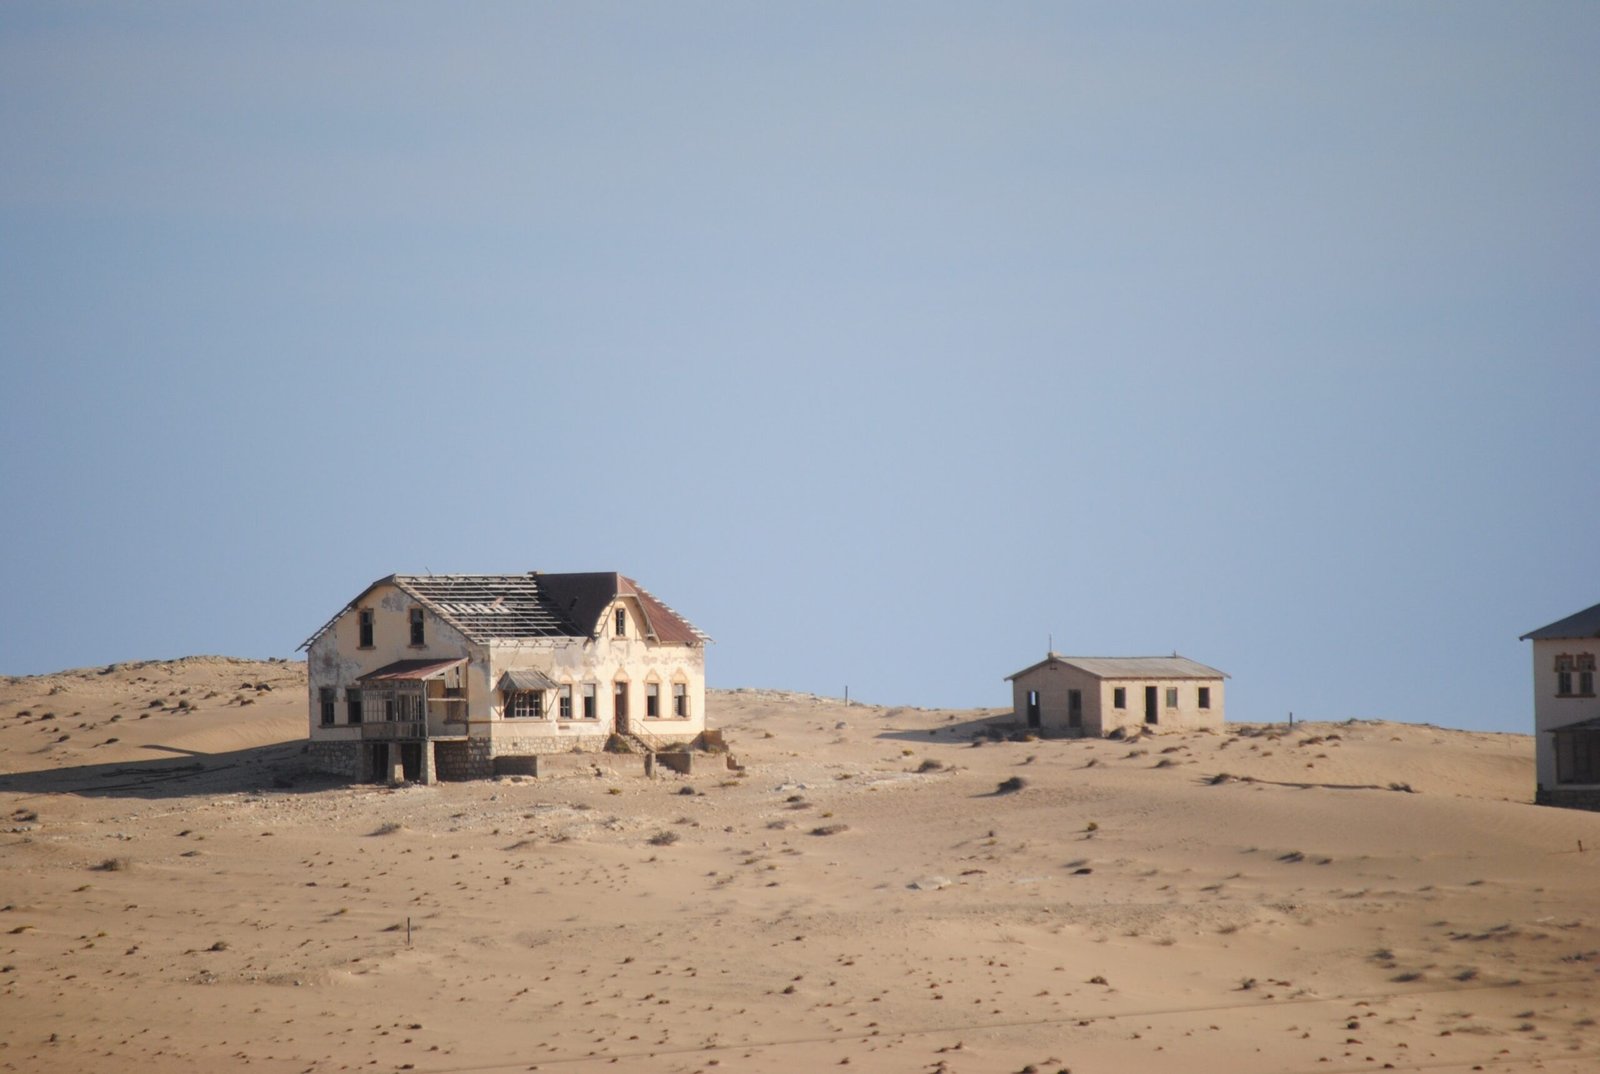 Photograph of abandoned houses in a ghost town